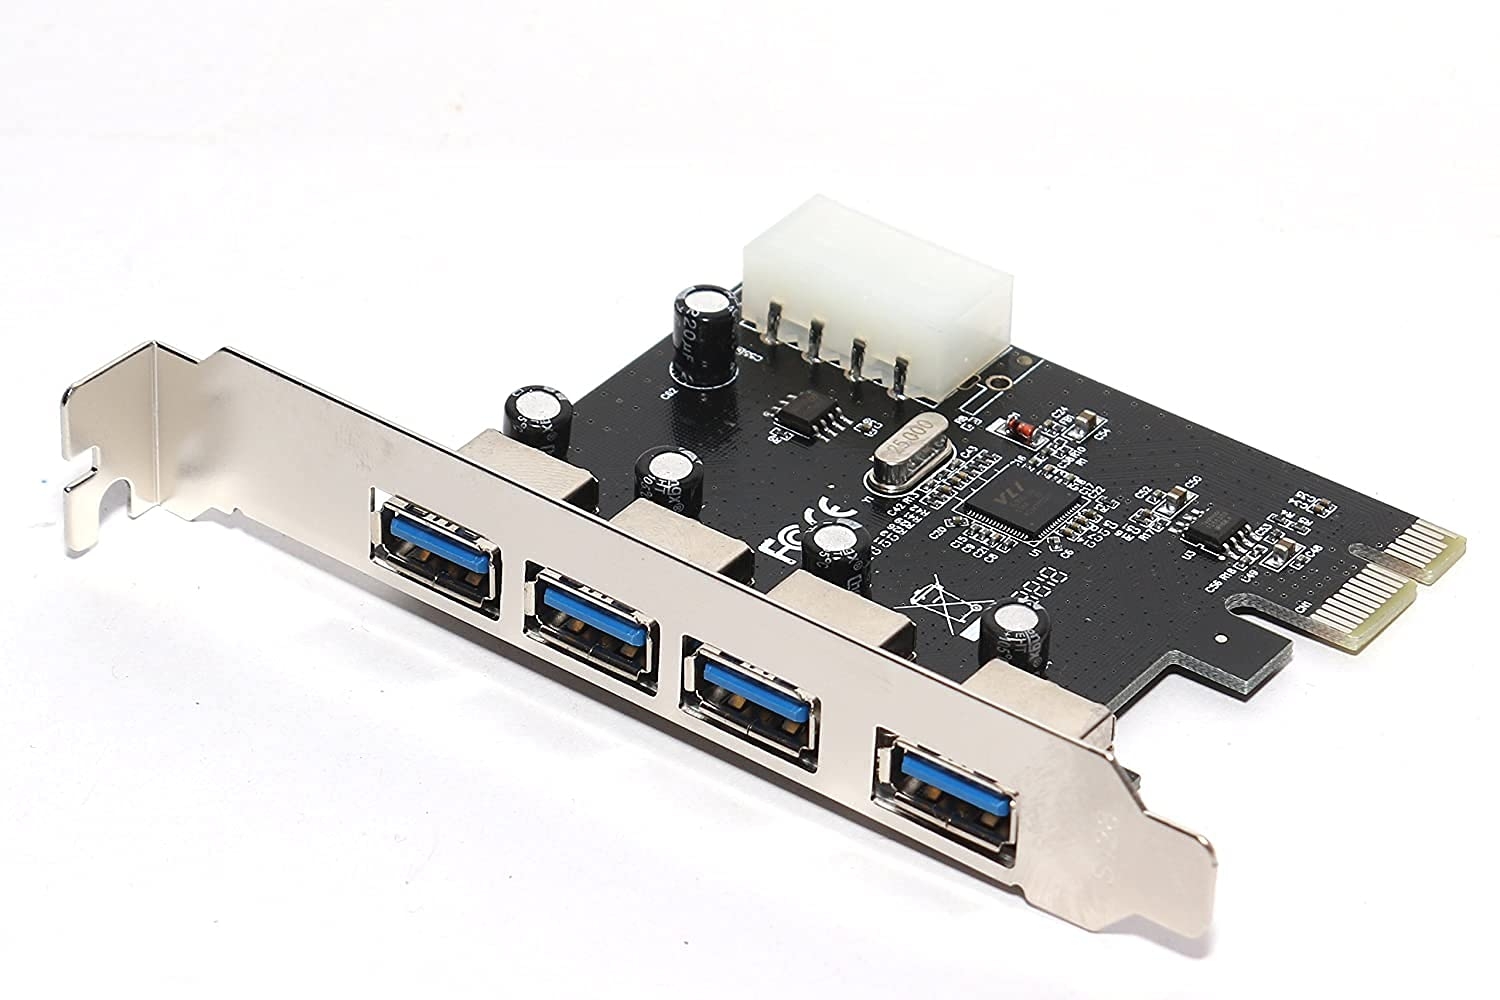 XIKKART PCI Express Card 4 Port USB 3.0 with 5V 4-Pin Power Connector up to 5 Gbps Speed